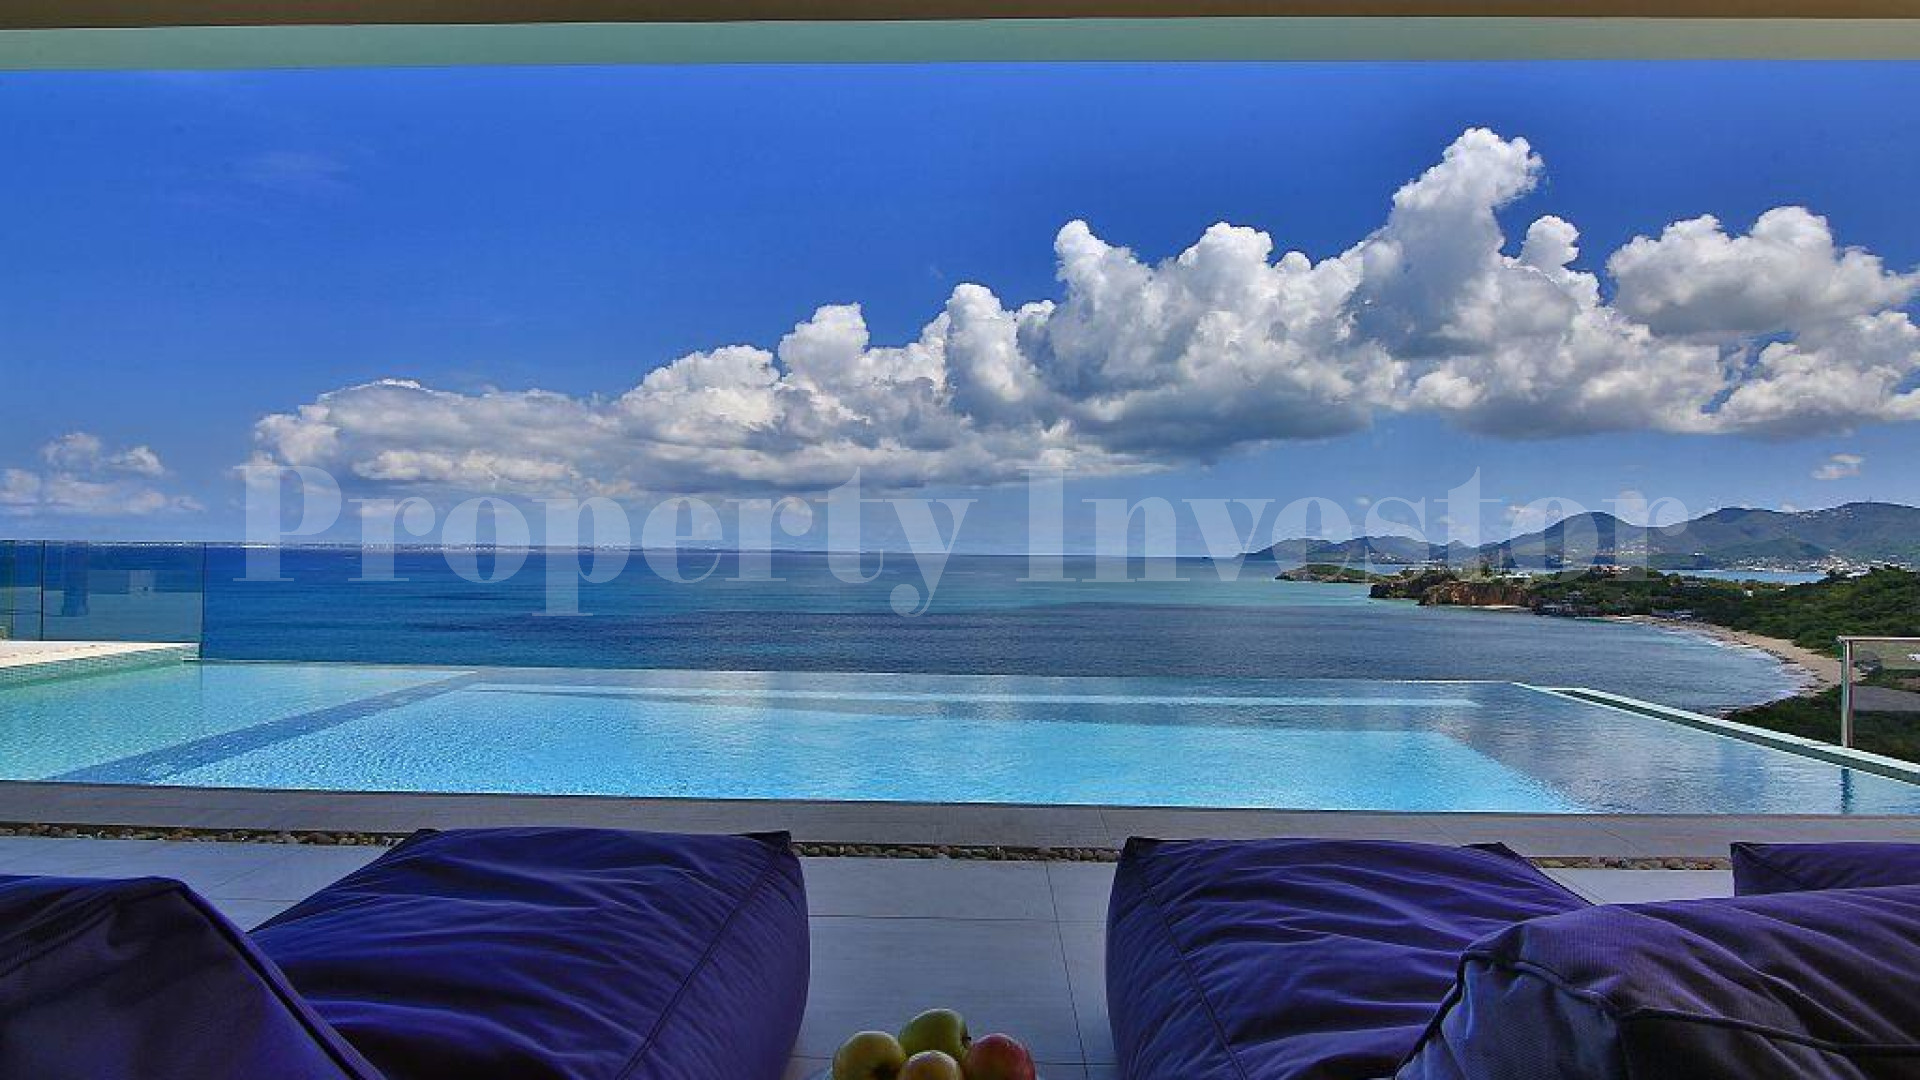 Jaw-dropping 5 Bedroom Luxury Oceanview Villa for Sale in Les Terres Basses, St. Martin